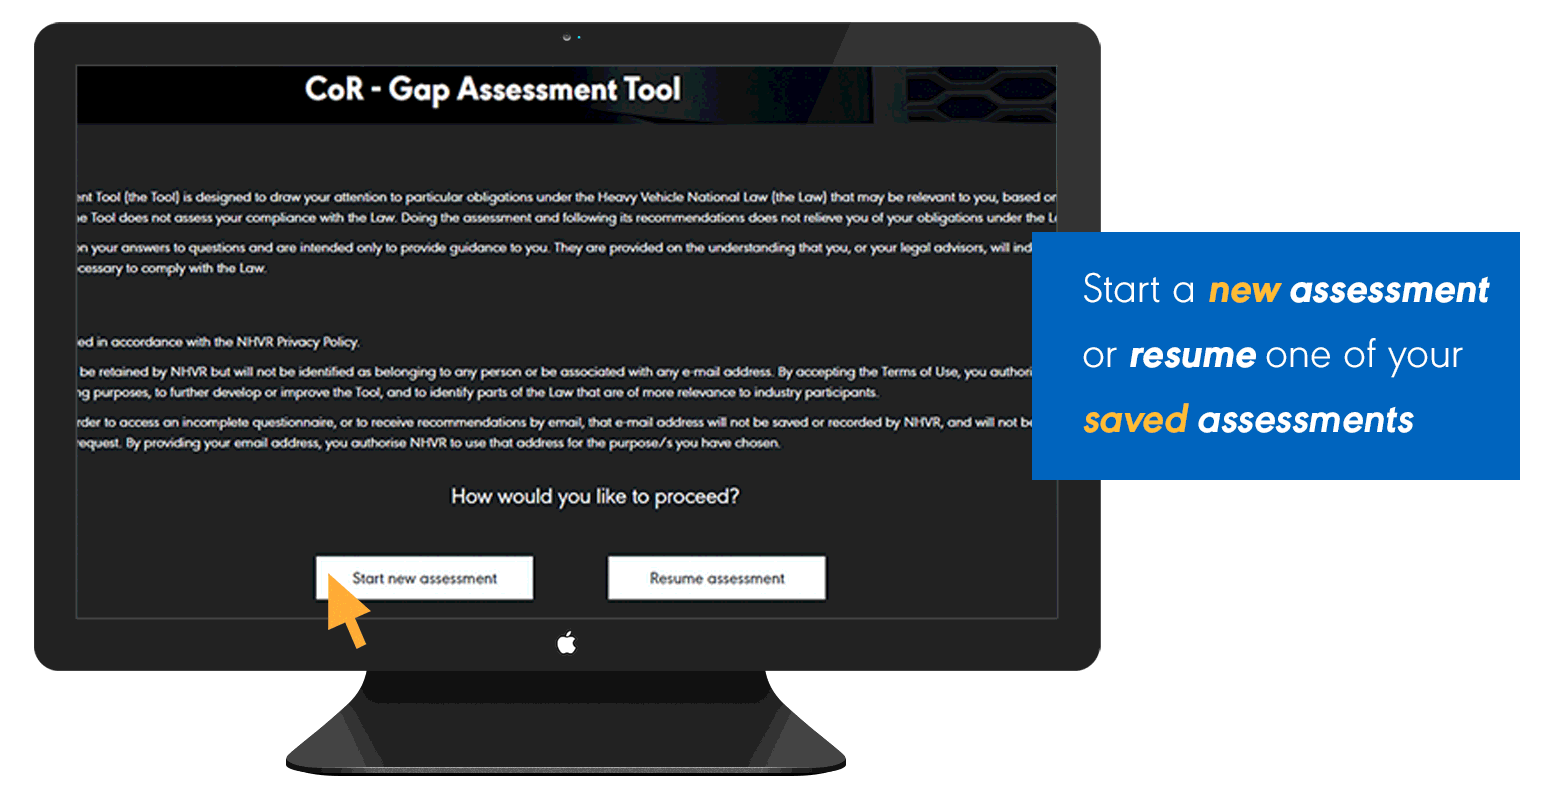 How to use the CoR gap assessment tool